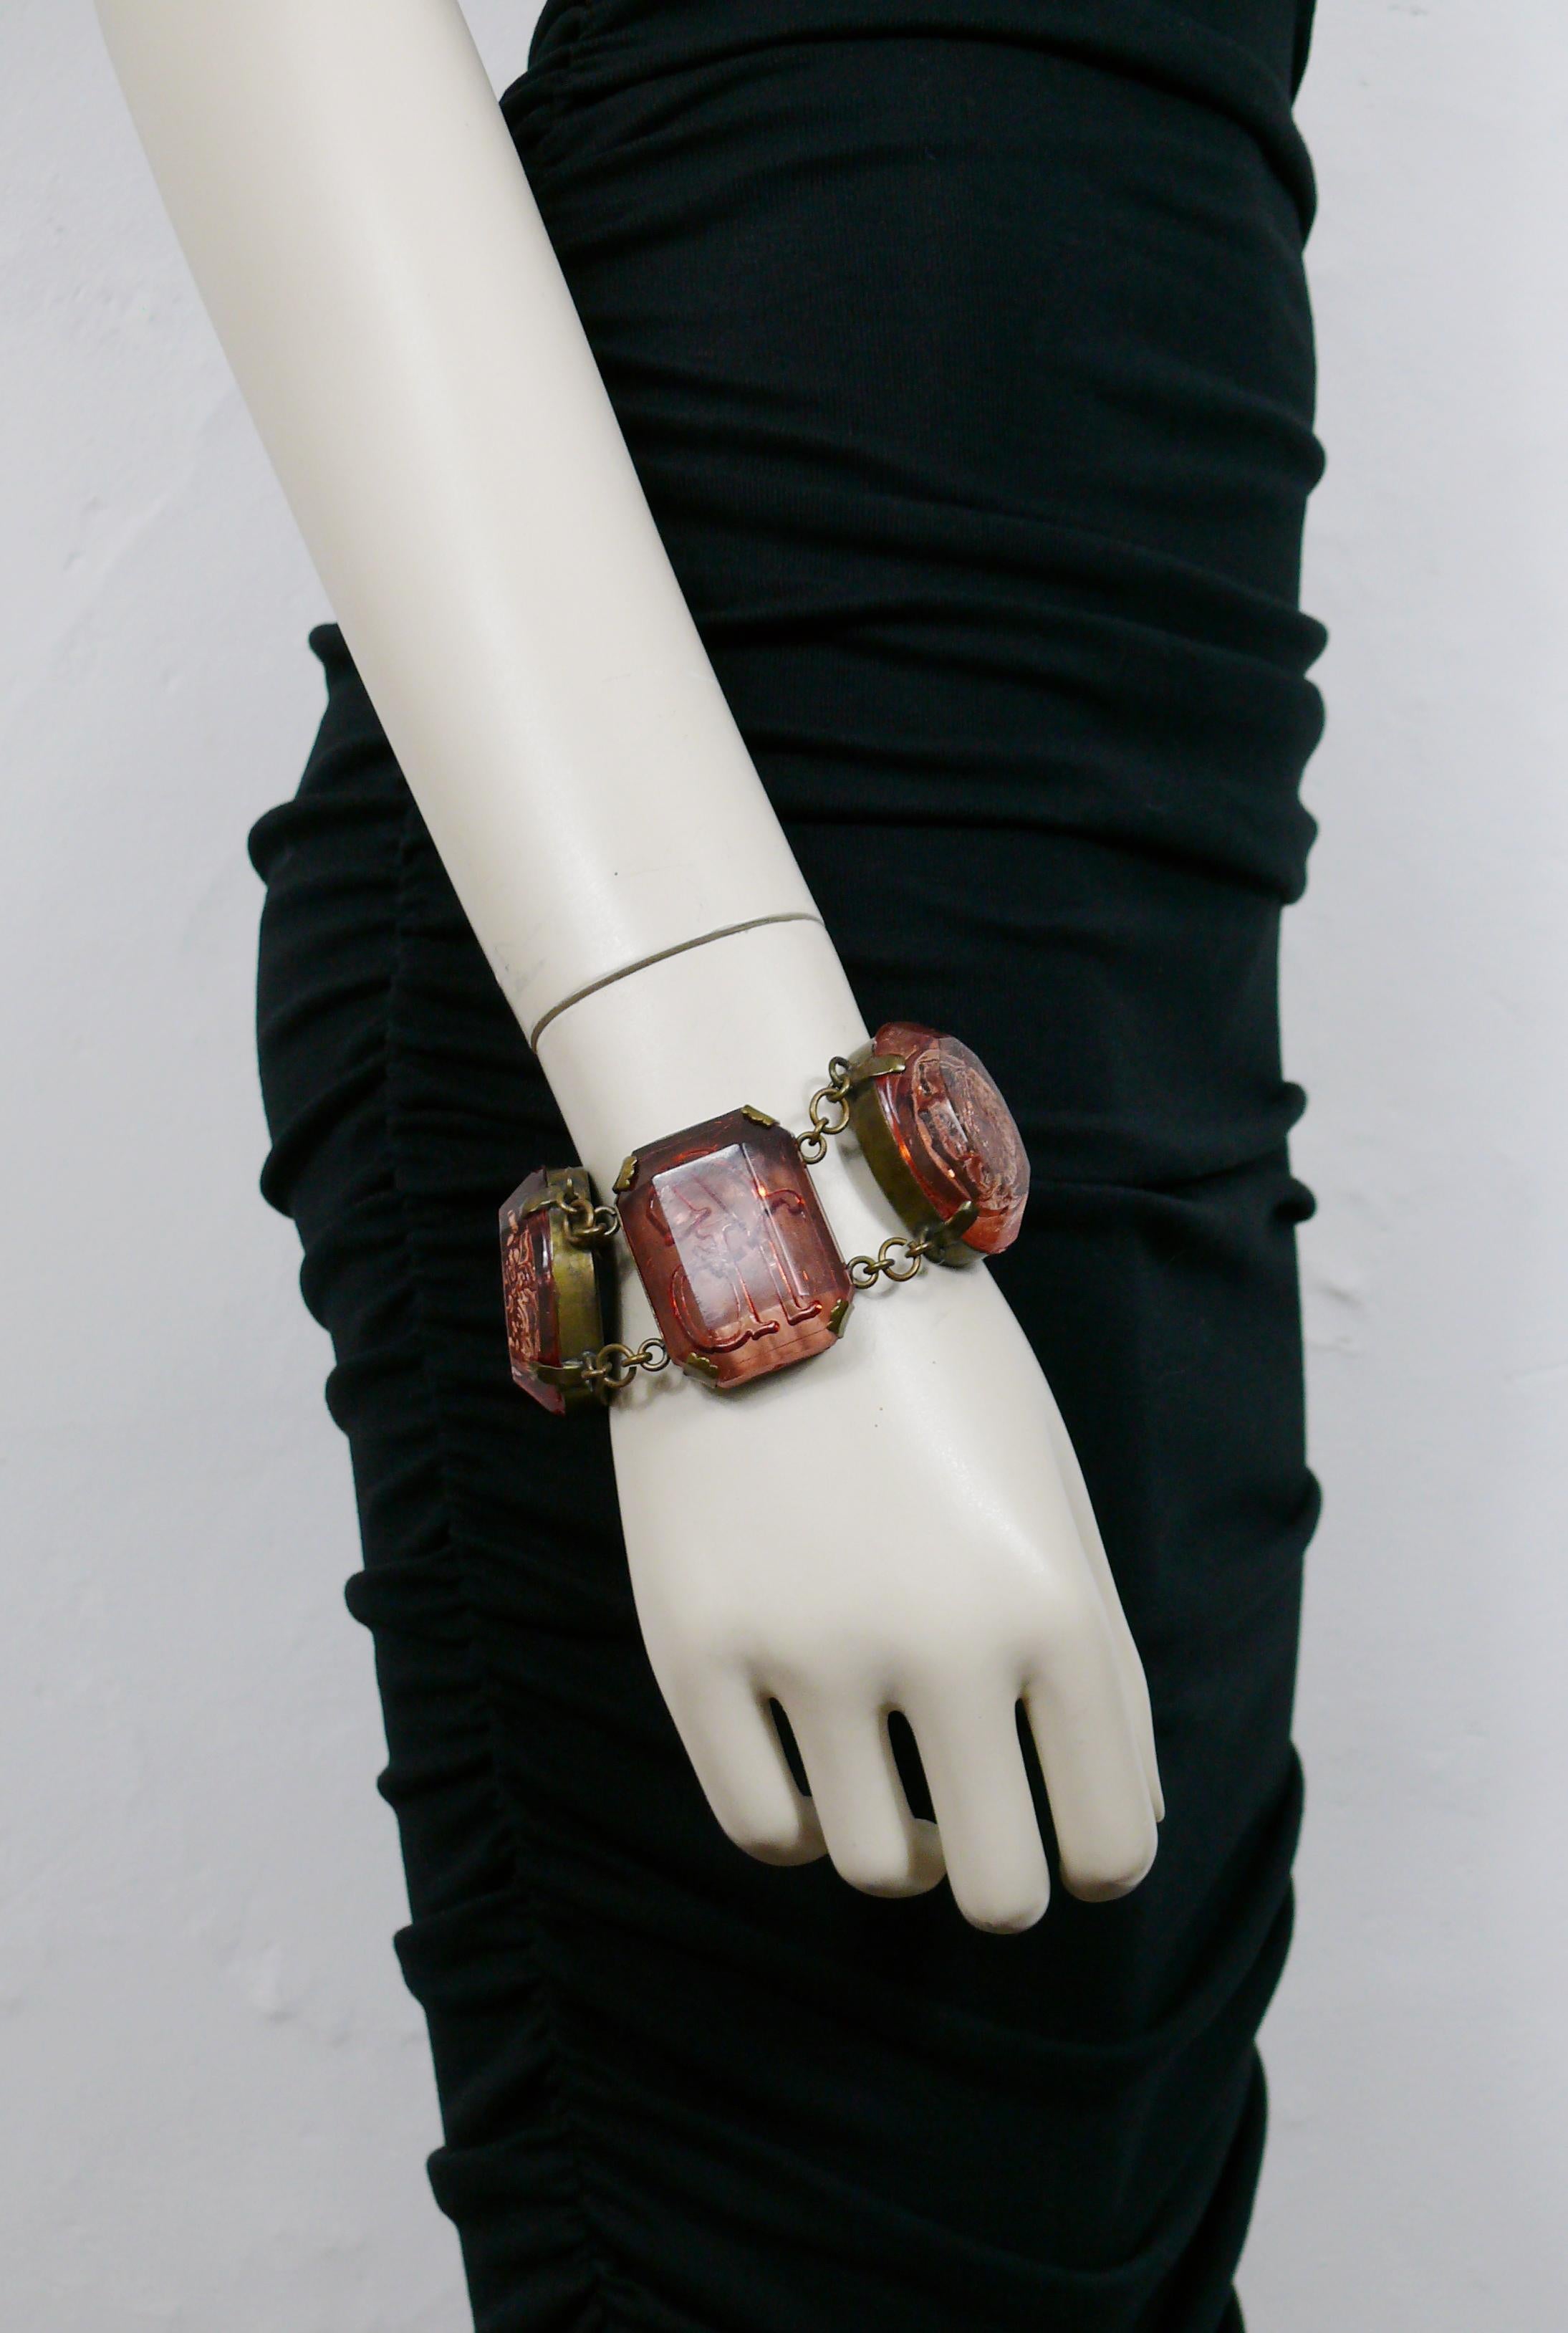 JEAN PAUL GAULTIER vintage antiqued bronze toned bracelet featuring five large strawberry color resin links featuring inlaids with scarabs, ancient roman cameo profiles and a JPG logo.

The antiqued bronze toned and distressed patina is from